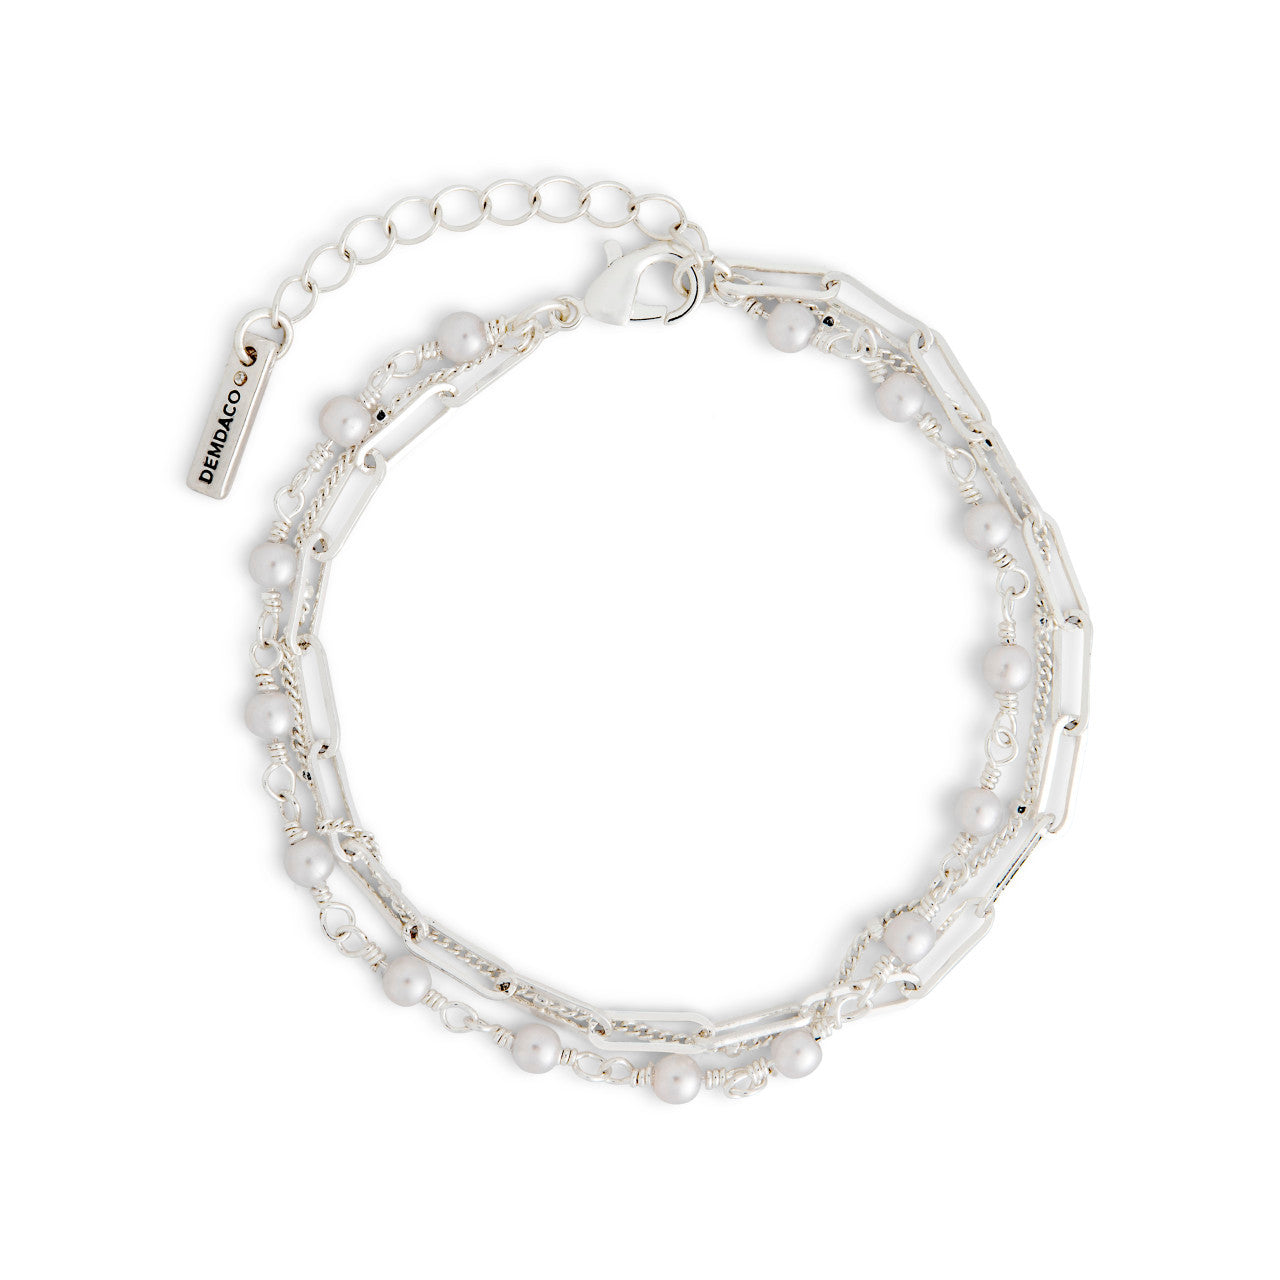 Pearls from Within Bracelet - Silver